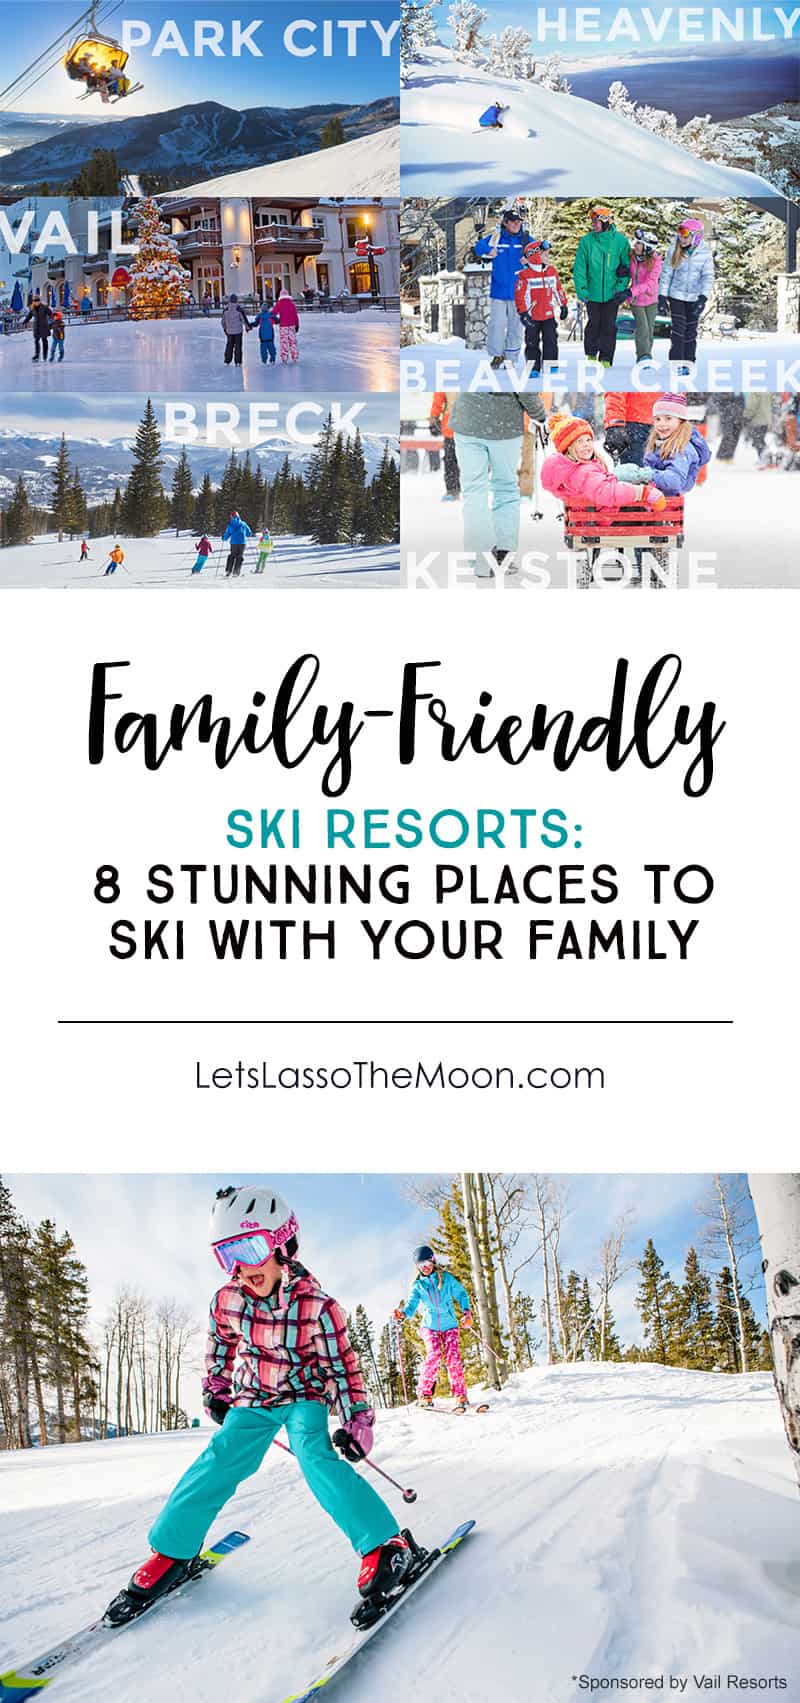 8 Stunning Ski Resorts Trips That Are Family-Friendly *Saving these idea for planning our next vacation